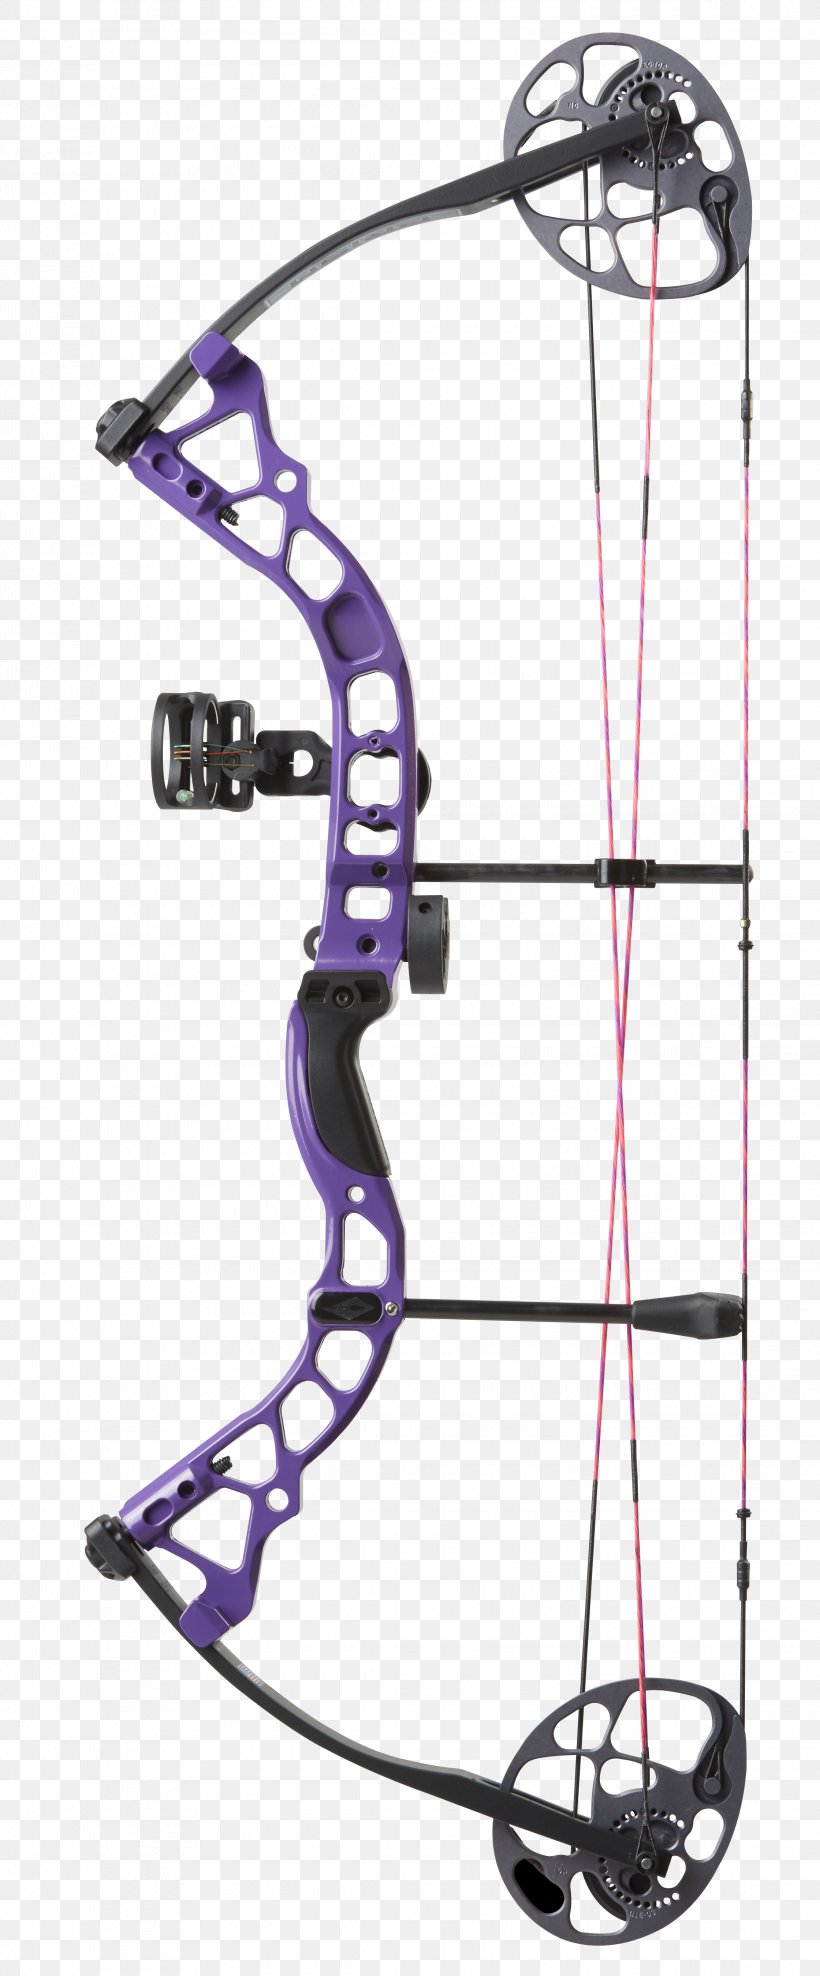 Compound Bows Bow And Arrow Archery Hunting Binary Cam, PNG, 2240x5400px, Compound Bows, Archery, Biggame Hunting, Binary Cam, Bow Download Free